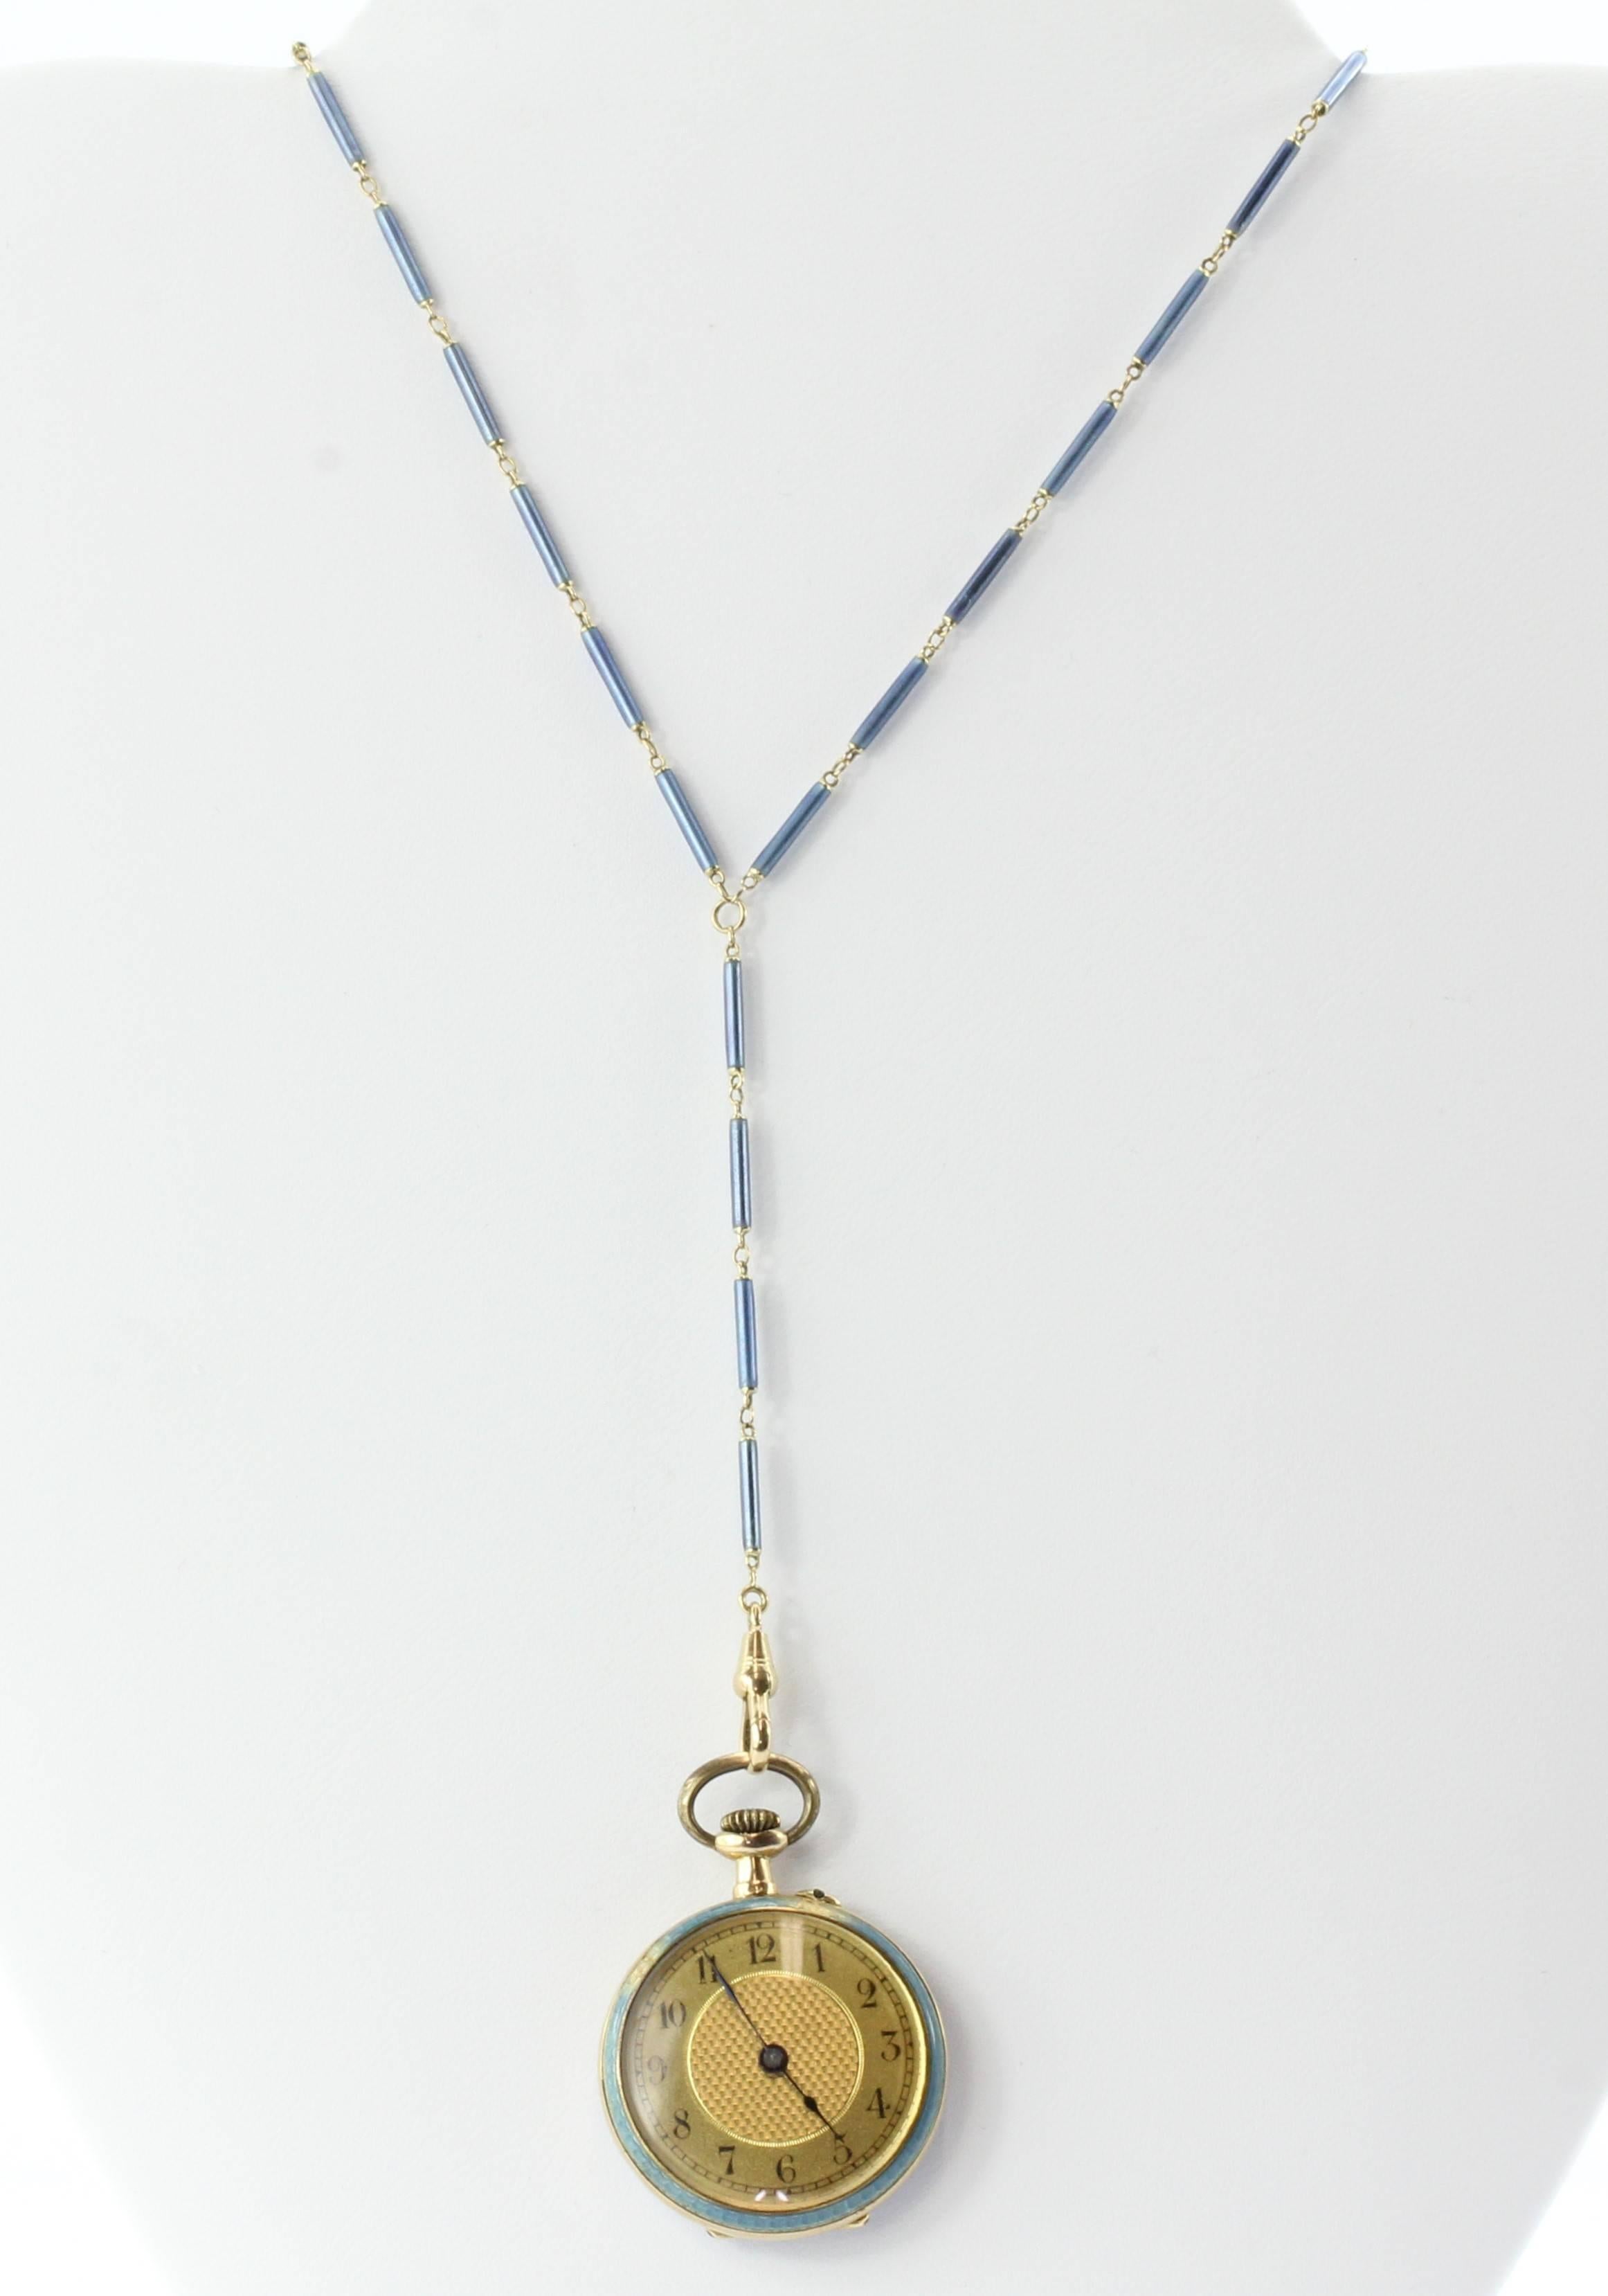 Art Deco 14K Gold Blue Enamel Swiss Pocket Watch & Lorgnette Necklace Chain. The watch is in great running condition. There is some damage to the enamel edge of the watch and a couple of the links on the chain. The chain is 14K yellow gold and